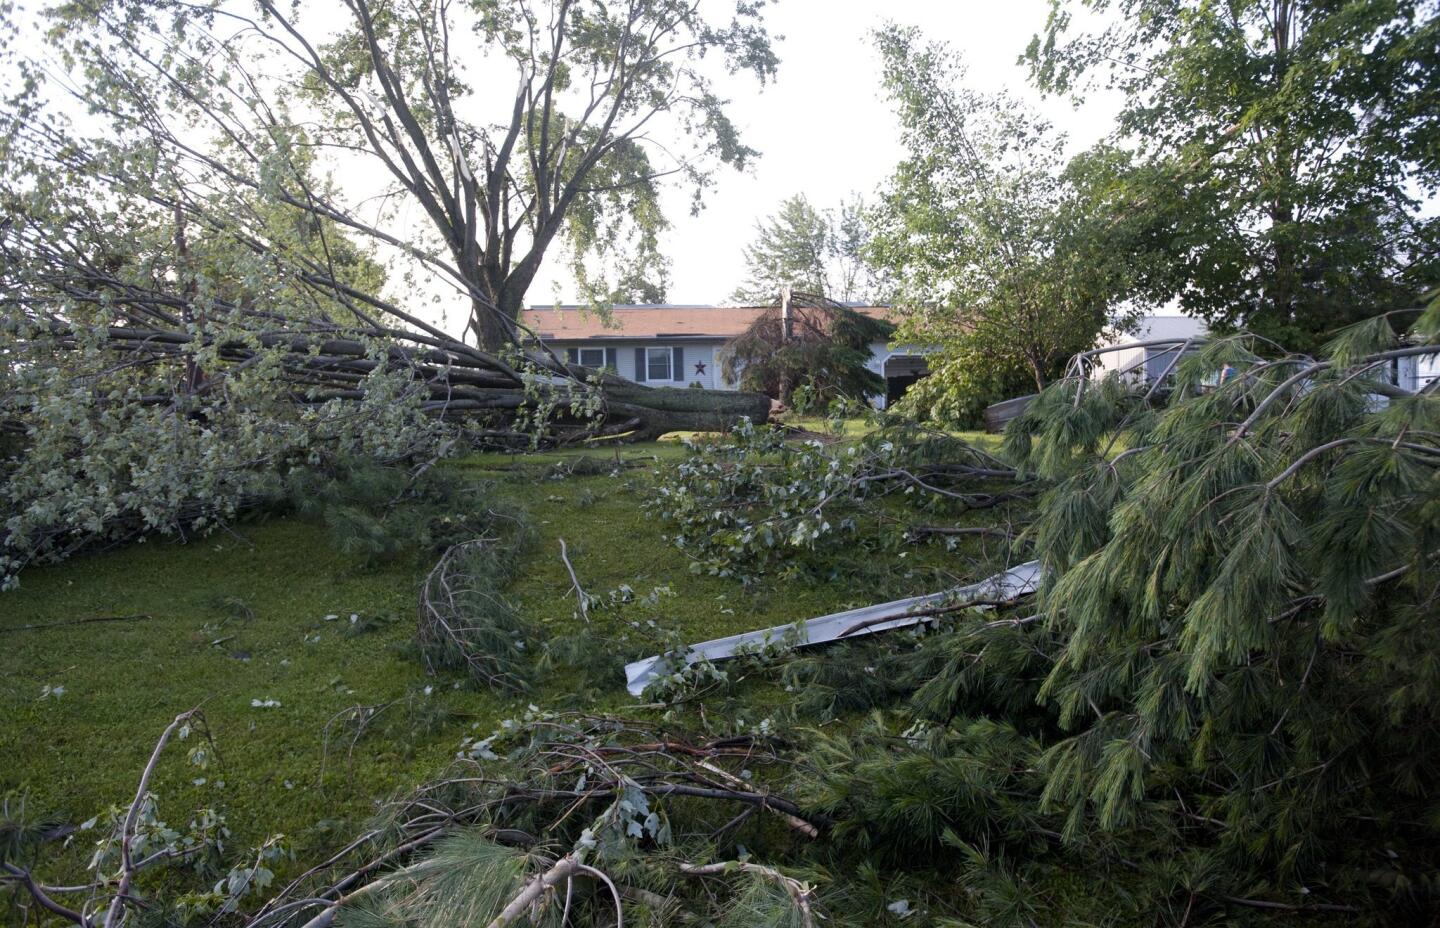 Severe weather, tornadoes blow through Midwest